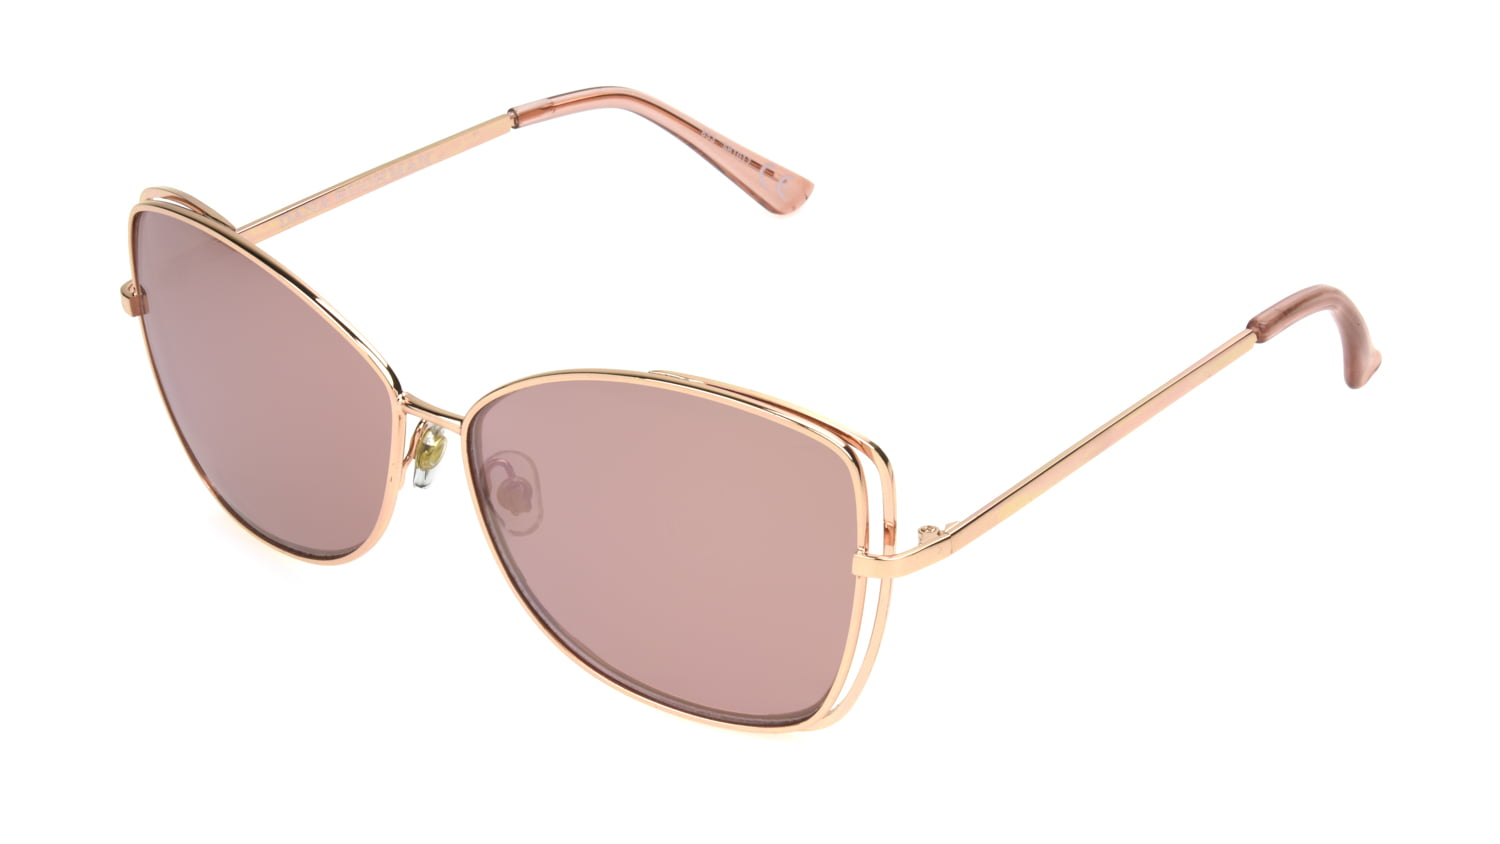 Foster Grant Women's Rose Gold Mirrored Butterfly Sunglasses L10 ...